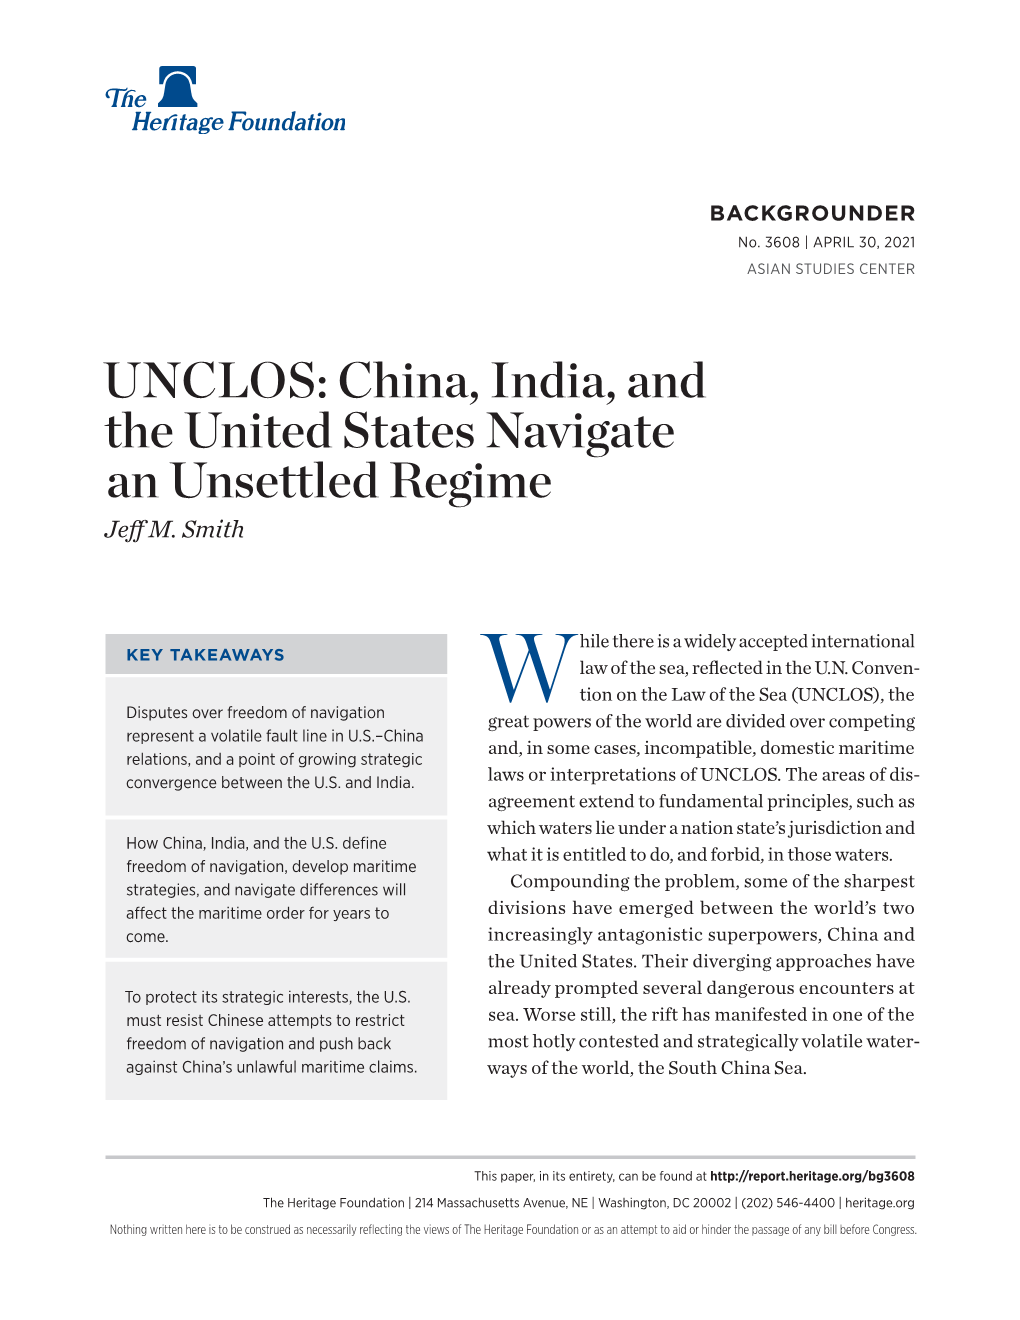 UNCLOS: China, India, and the United States Navigate an Unsettled Regime Jeff M